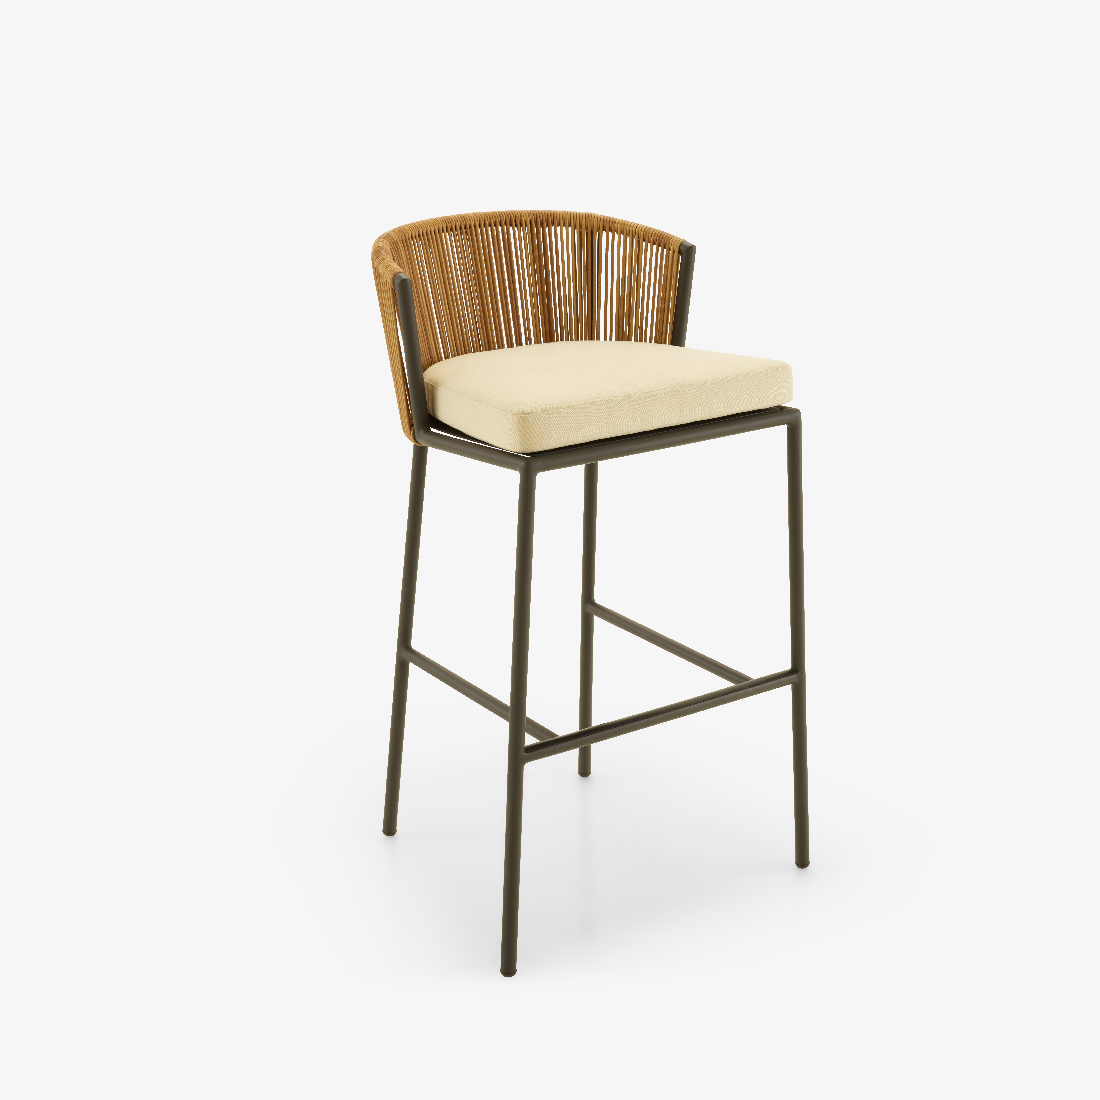 Image Low bar chair   2